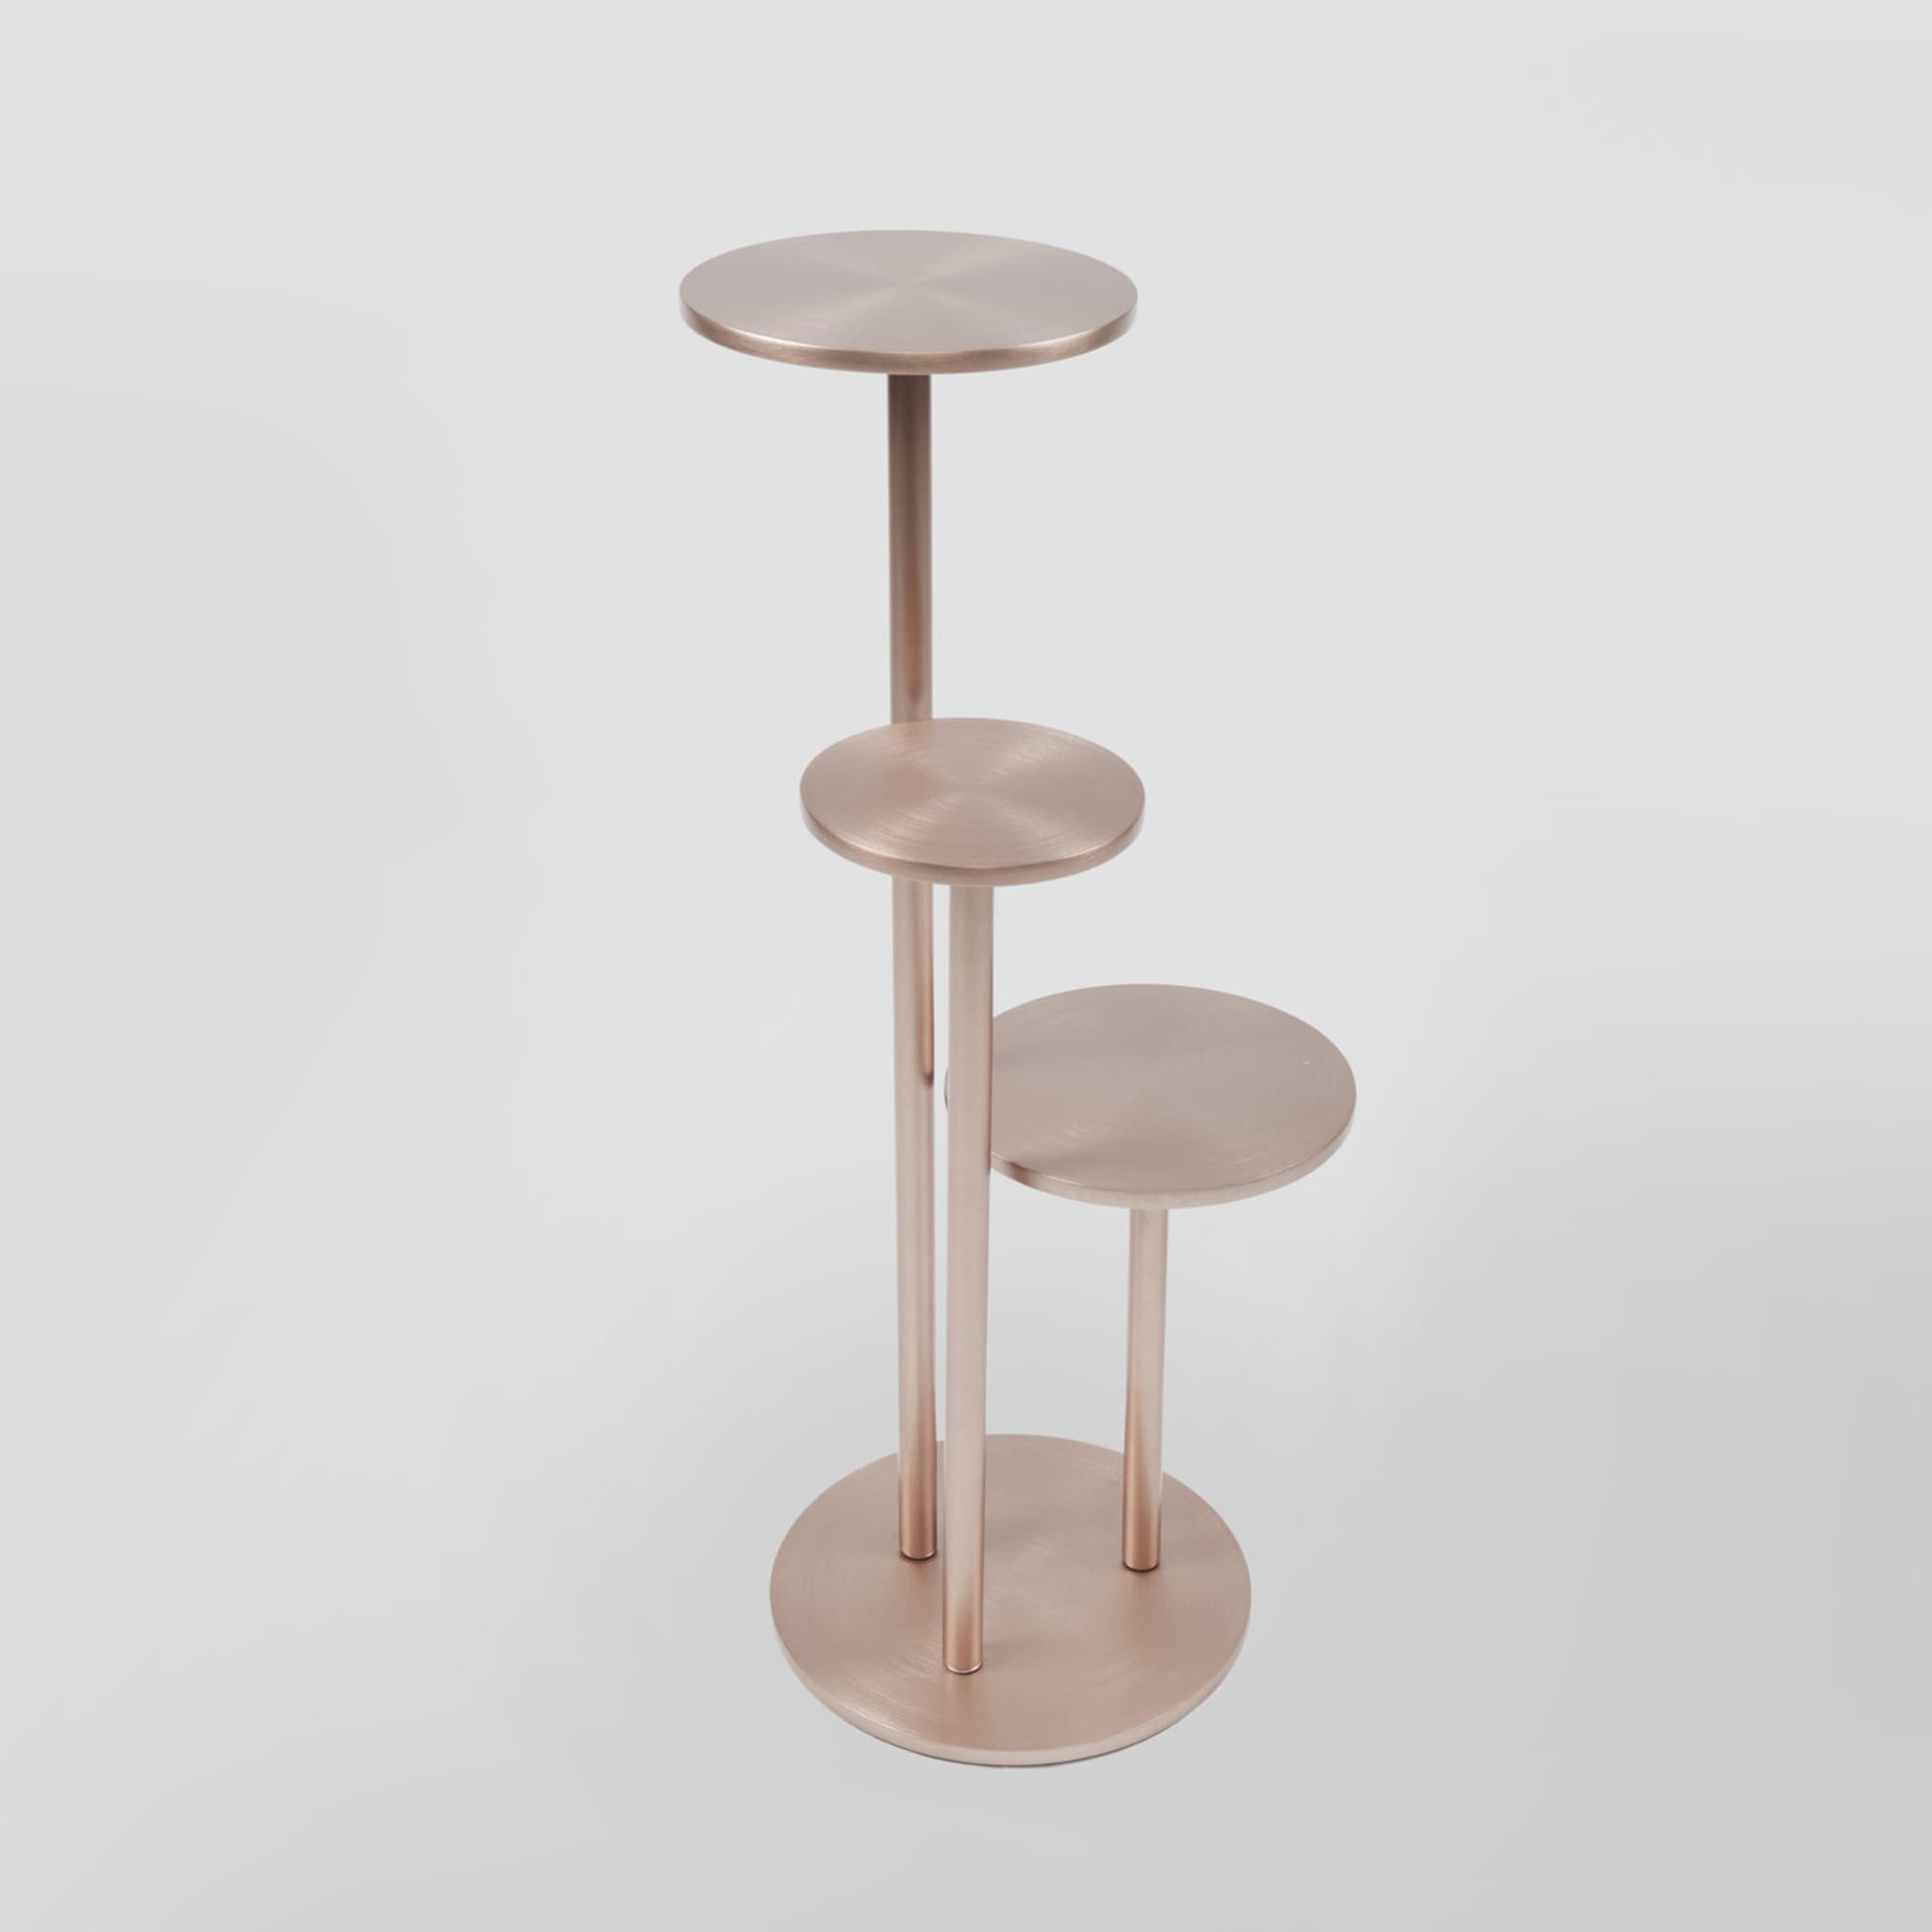 Orion Side Table in Champagne - Alternative view 1